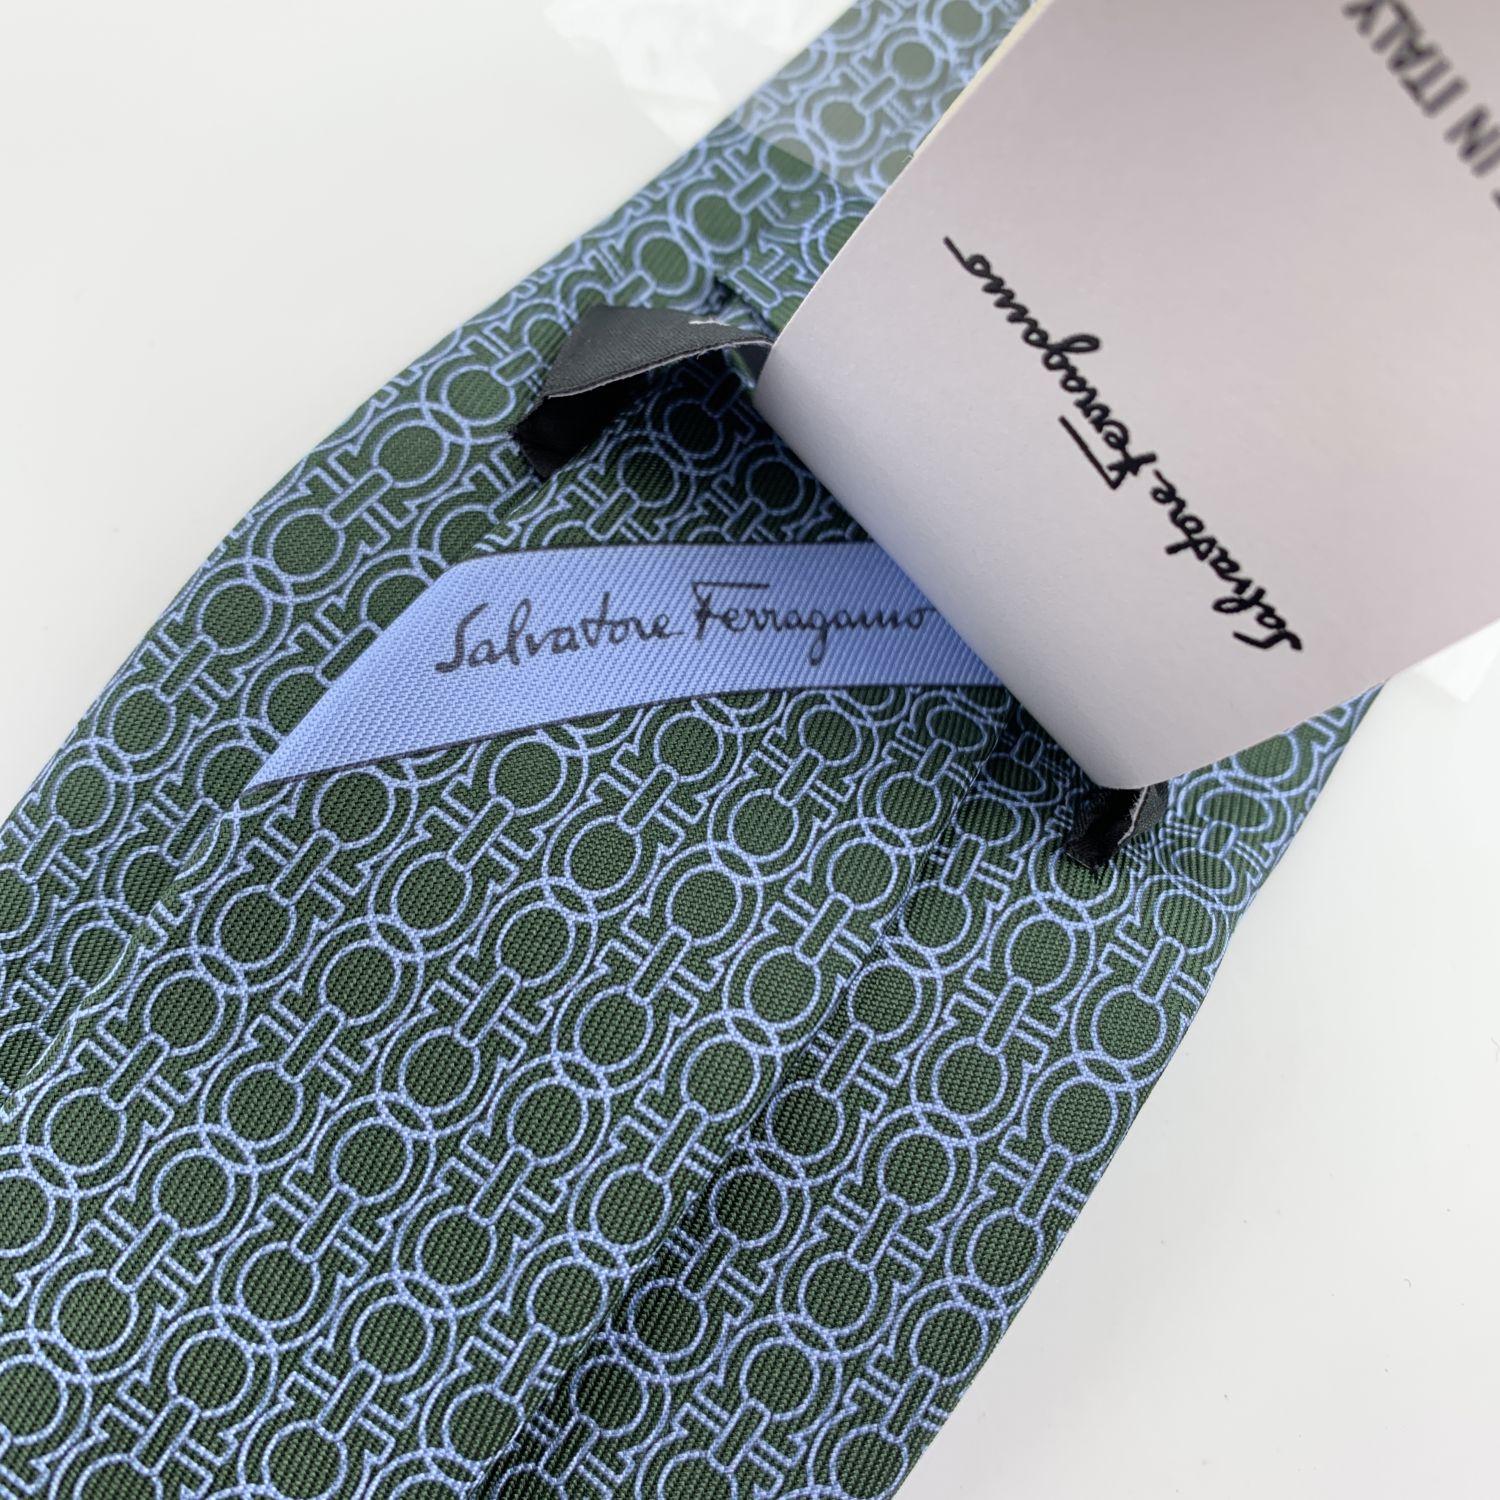 Salvatore Ferragamo 'Icona' men neck tie. Allover light blue Gancini pattern on dark green background. Composition: 100% Silk. Measurements: 60 x 3.1 inches - 152 x 8 cm. Made in Italy.

Retail price was 155 Euros


Details

MATERIAL: Silk

COLOR: